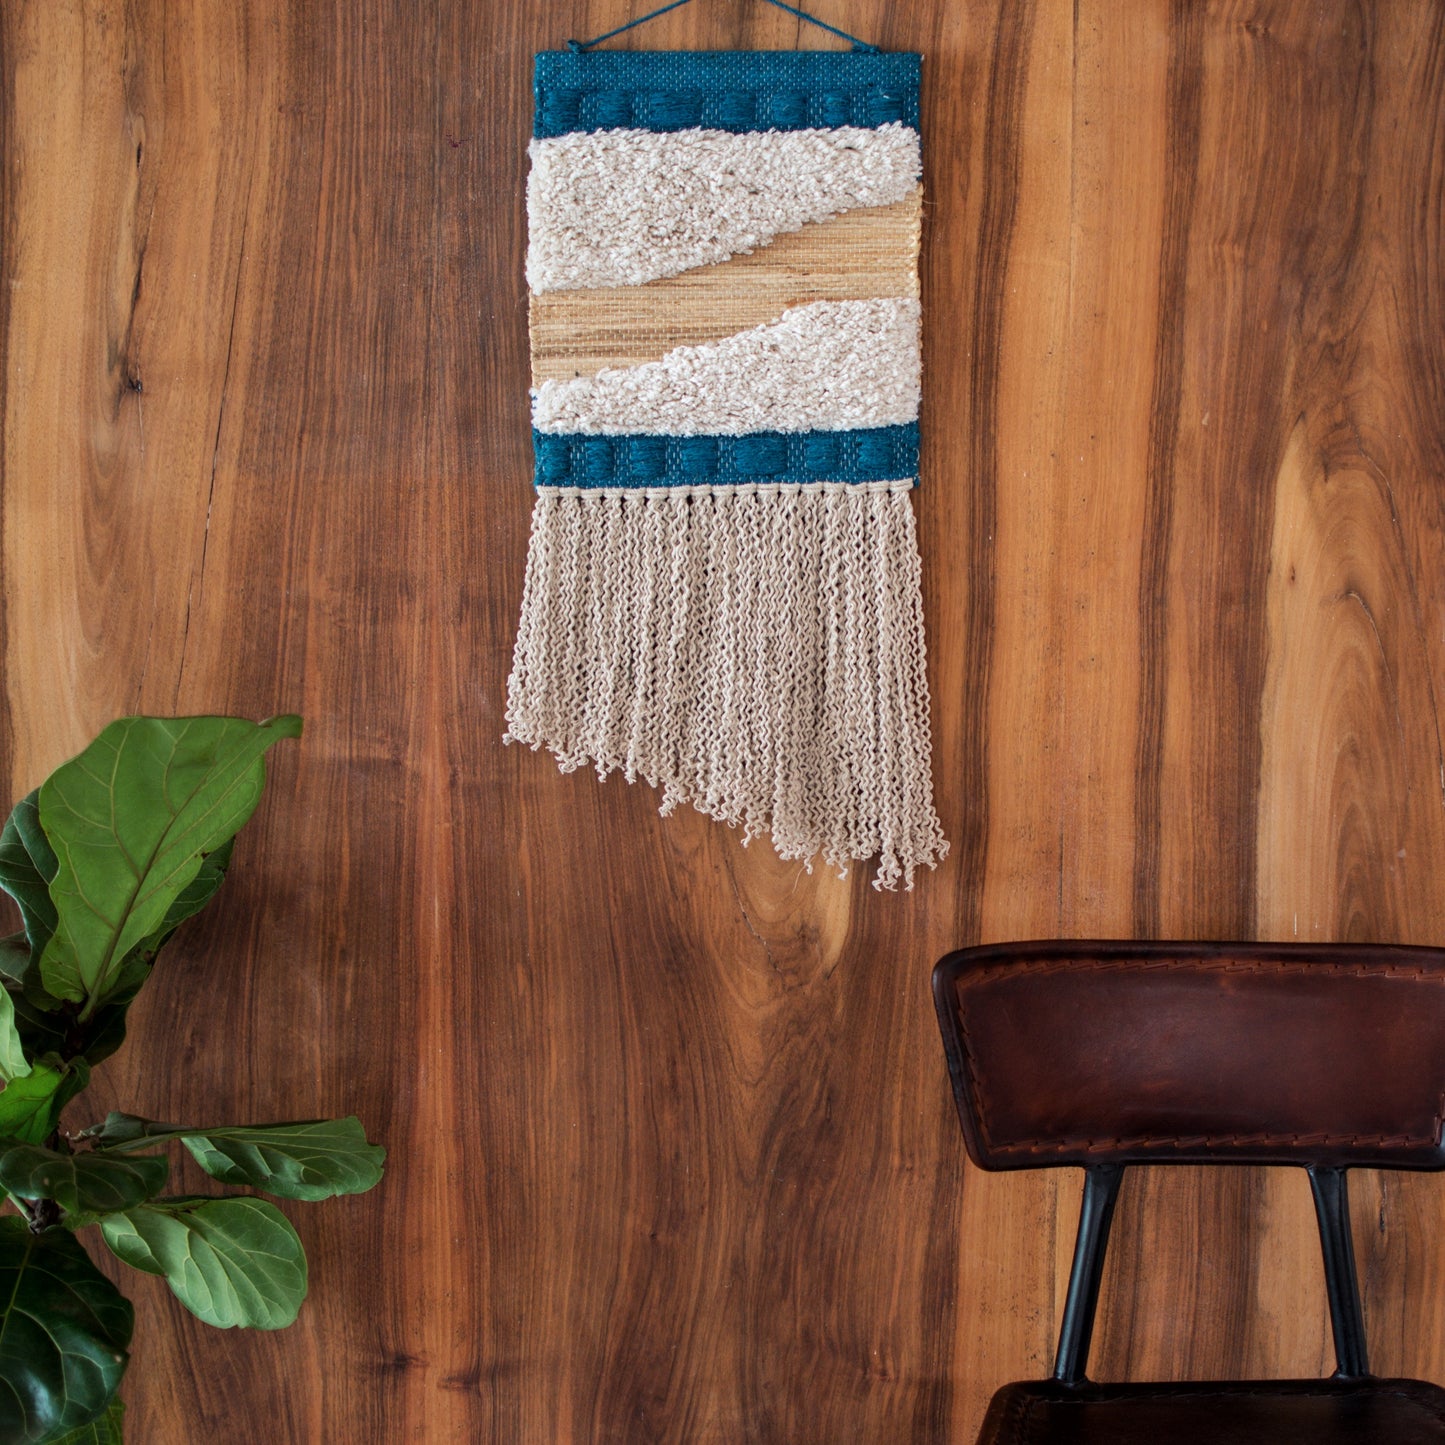 Bohemian Wall hanging handmade with sustainable materials